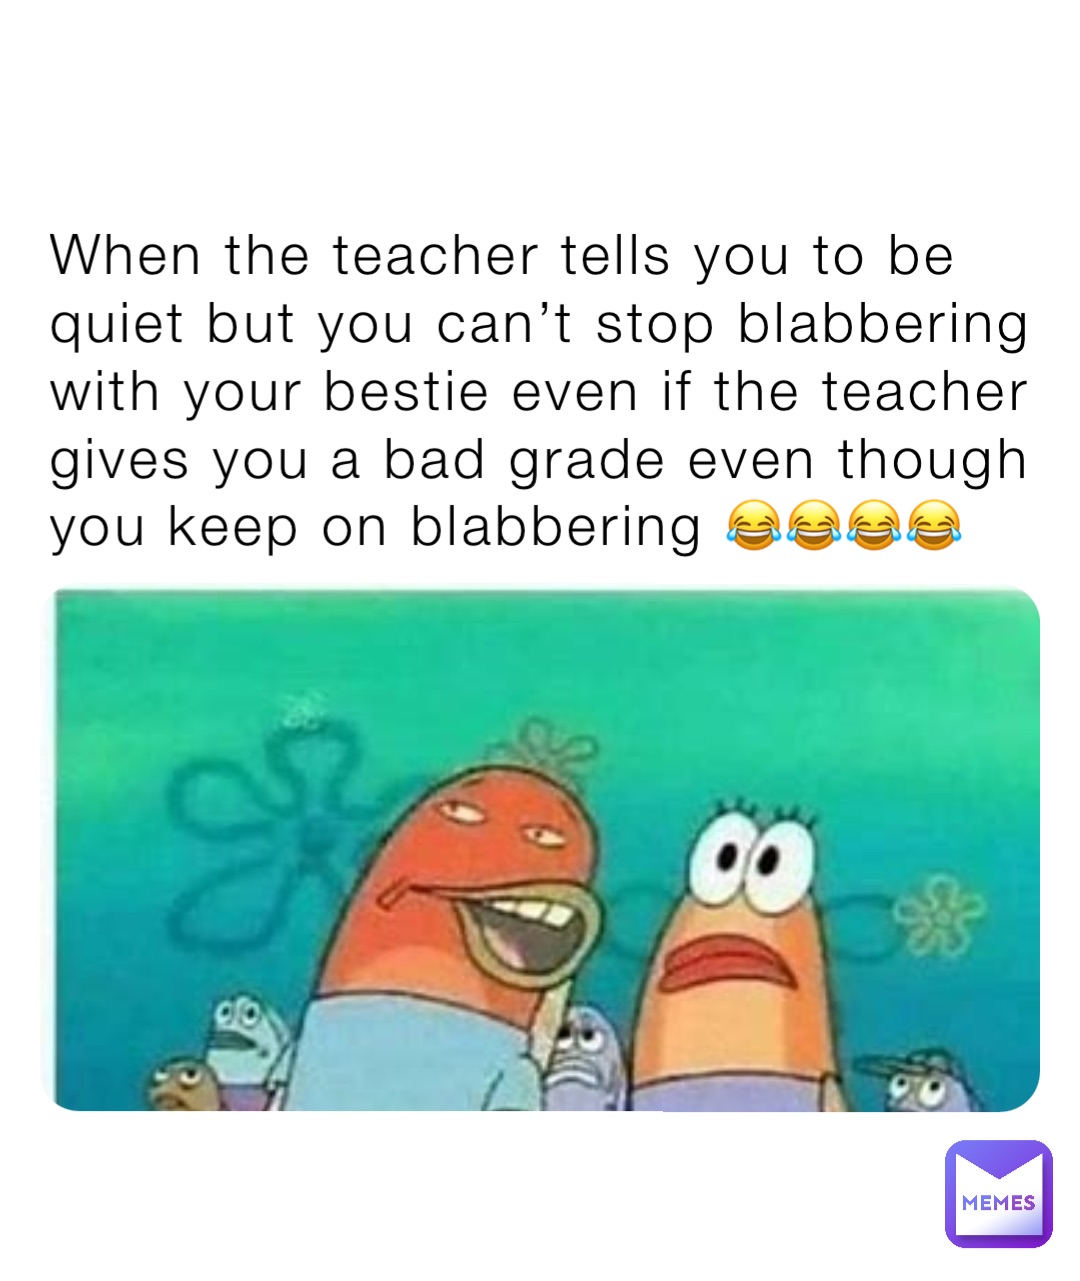 When the teacher tells you to be quiet but you can’t stop blabbering with your bestie even if the teacher gives you a bad grade even though you keep on blabbering 😂😂😂😂